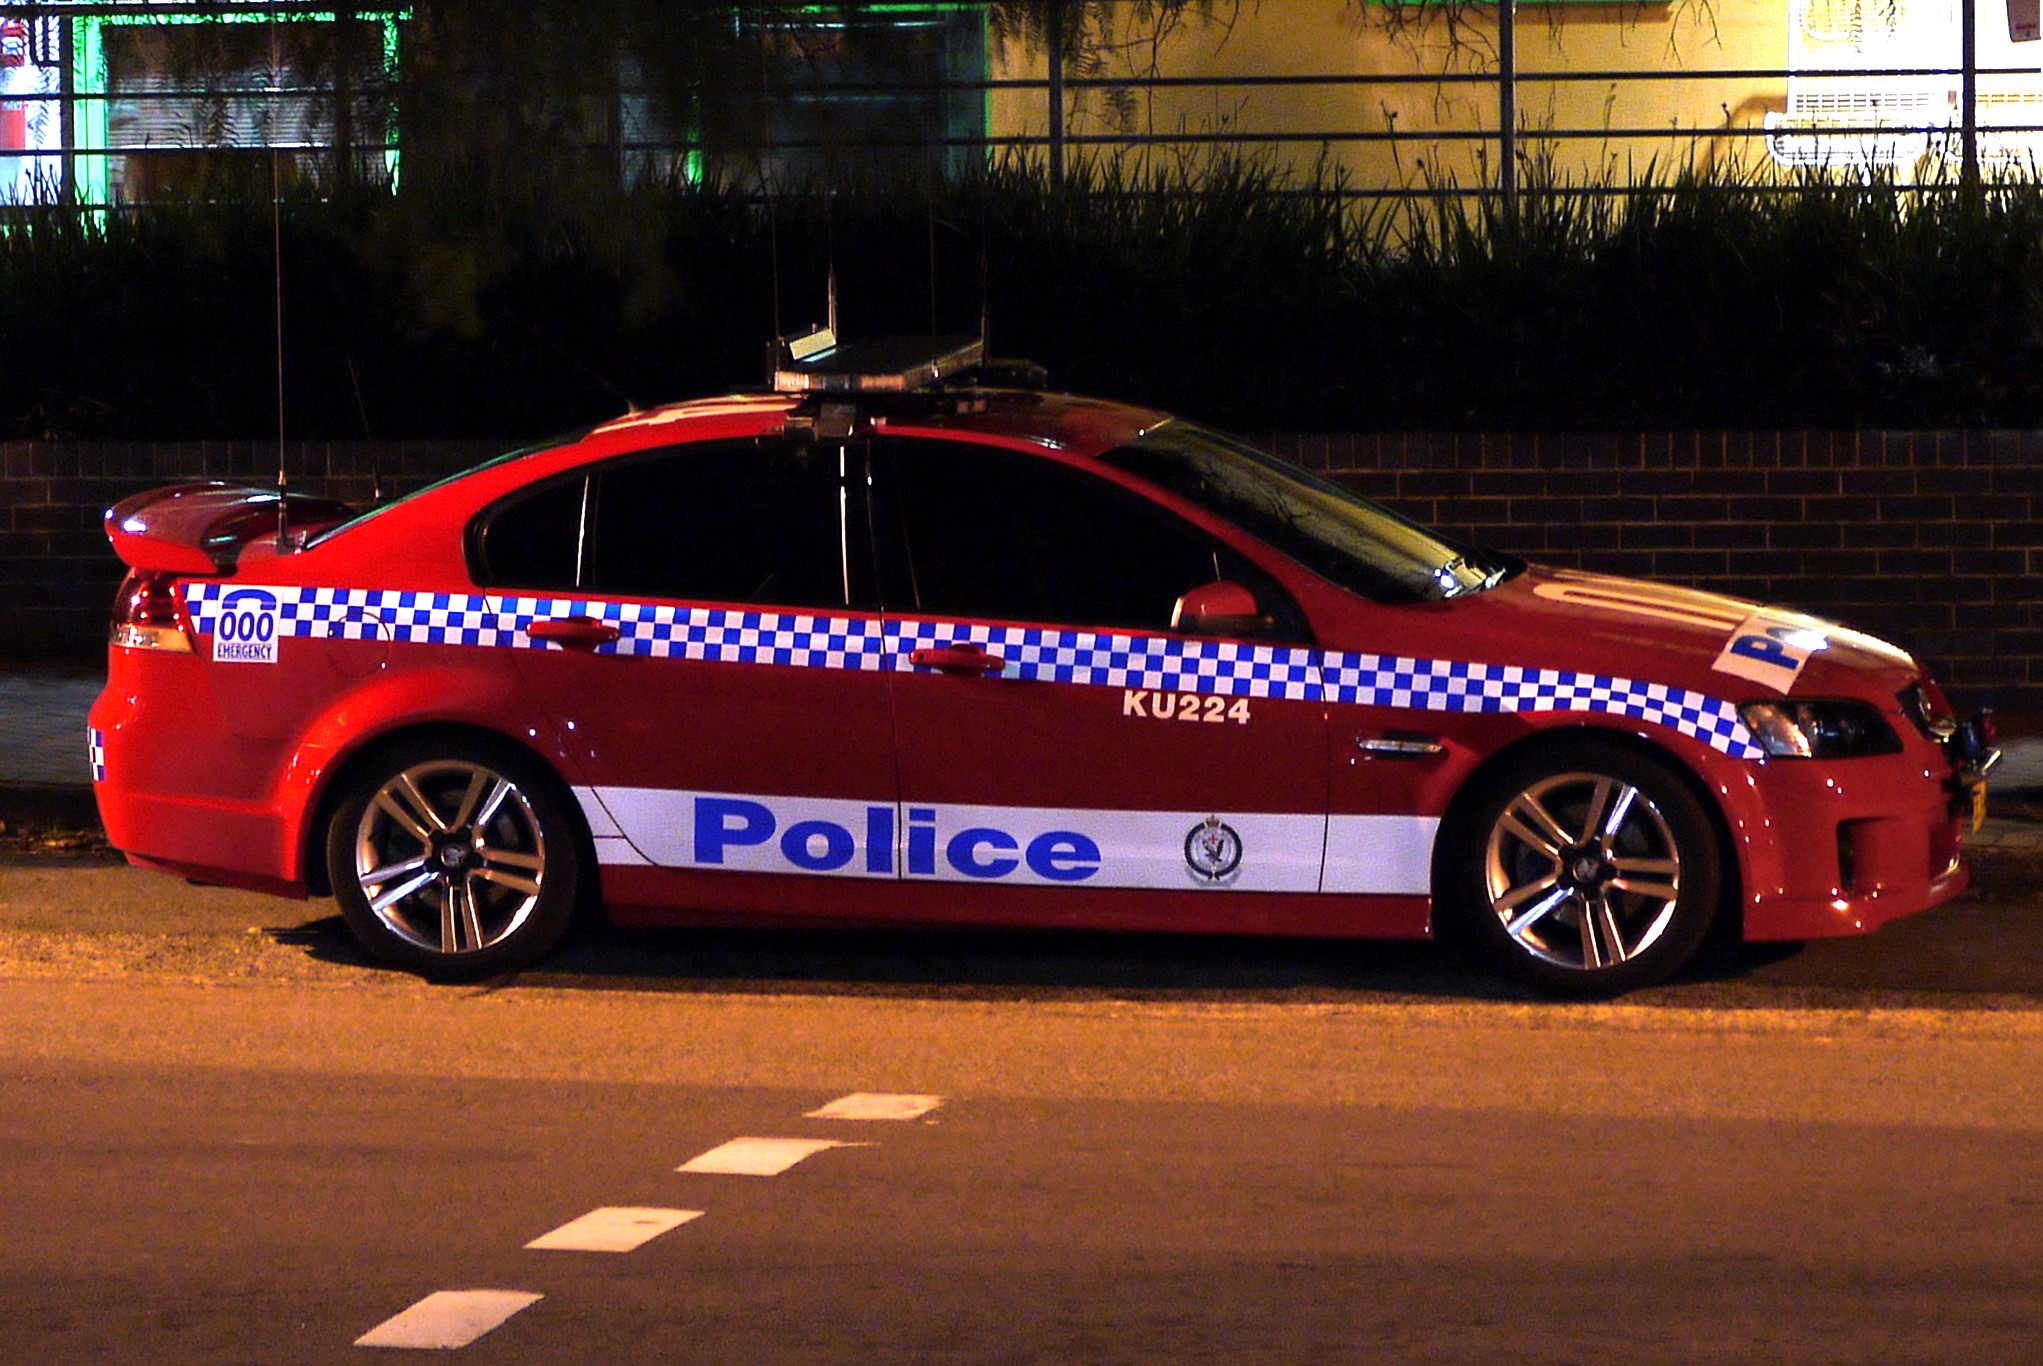 Kuringhai 224 Commodore SS ANPR - Flickr - Highway Patrol Images (1)